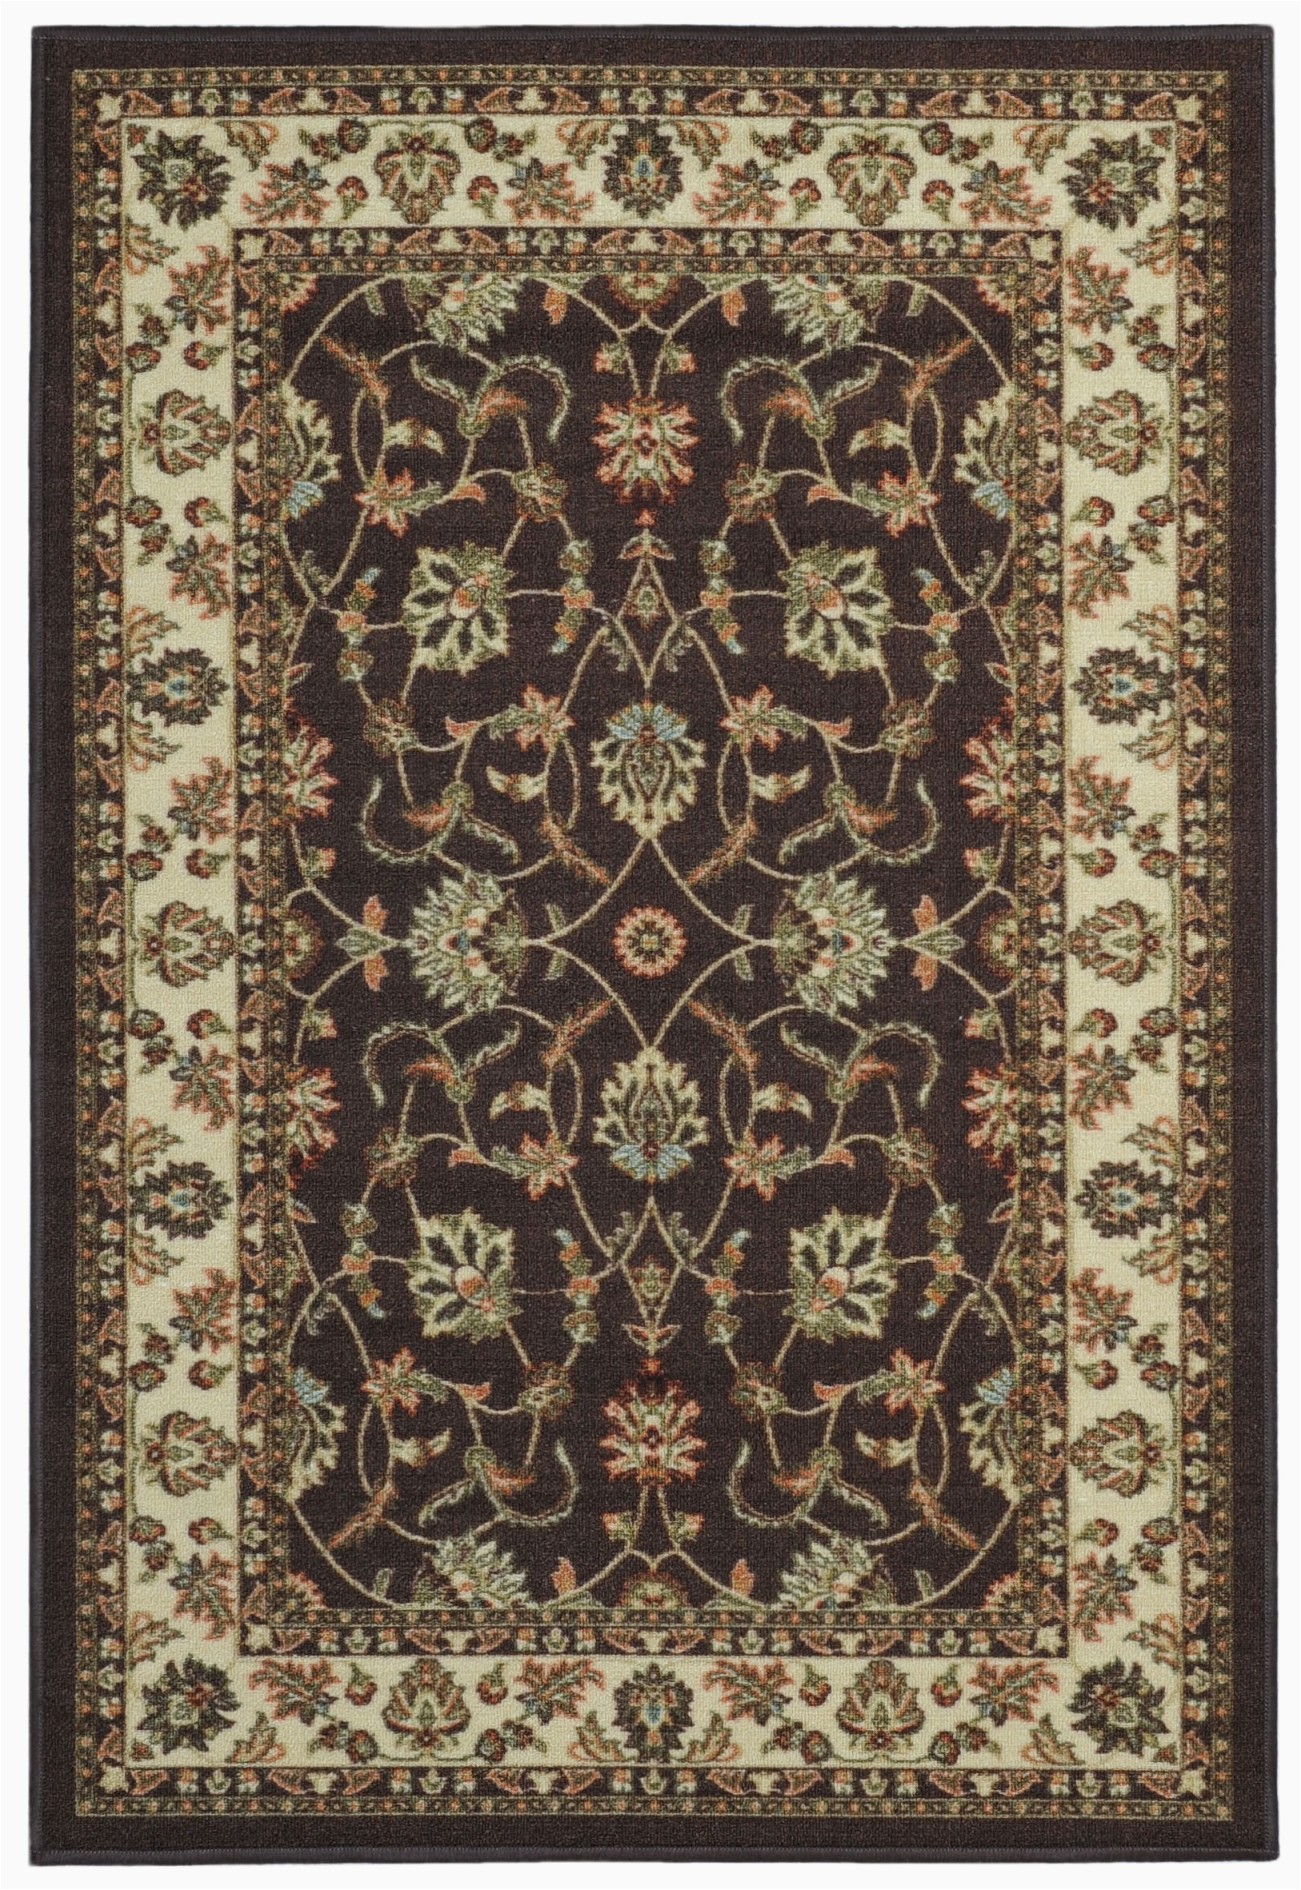 5×7 Non Skid area Rug Maxy Home Hamam Collection Ha 5088 Non Skid Rubber Back area Rug 60 Inch by 78 Inch 5 X 7 Walmart